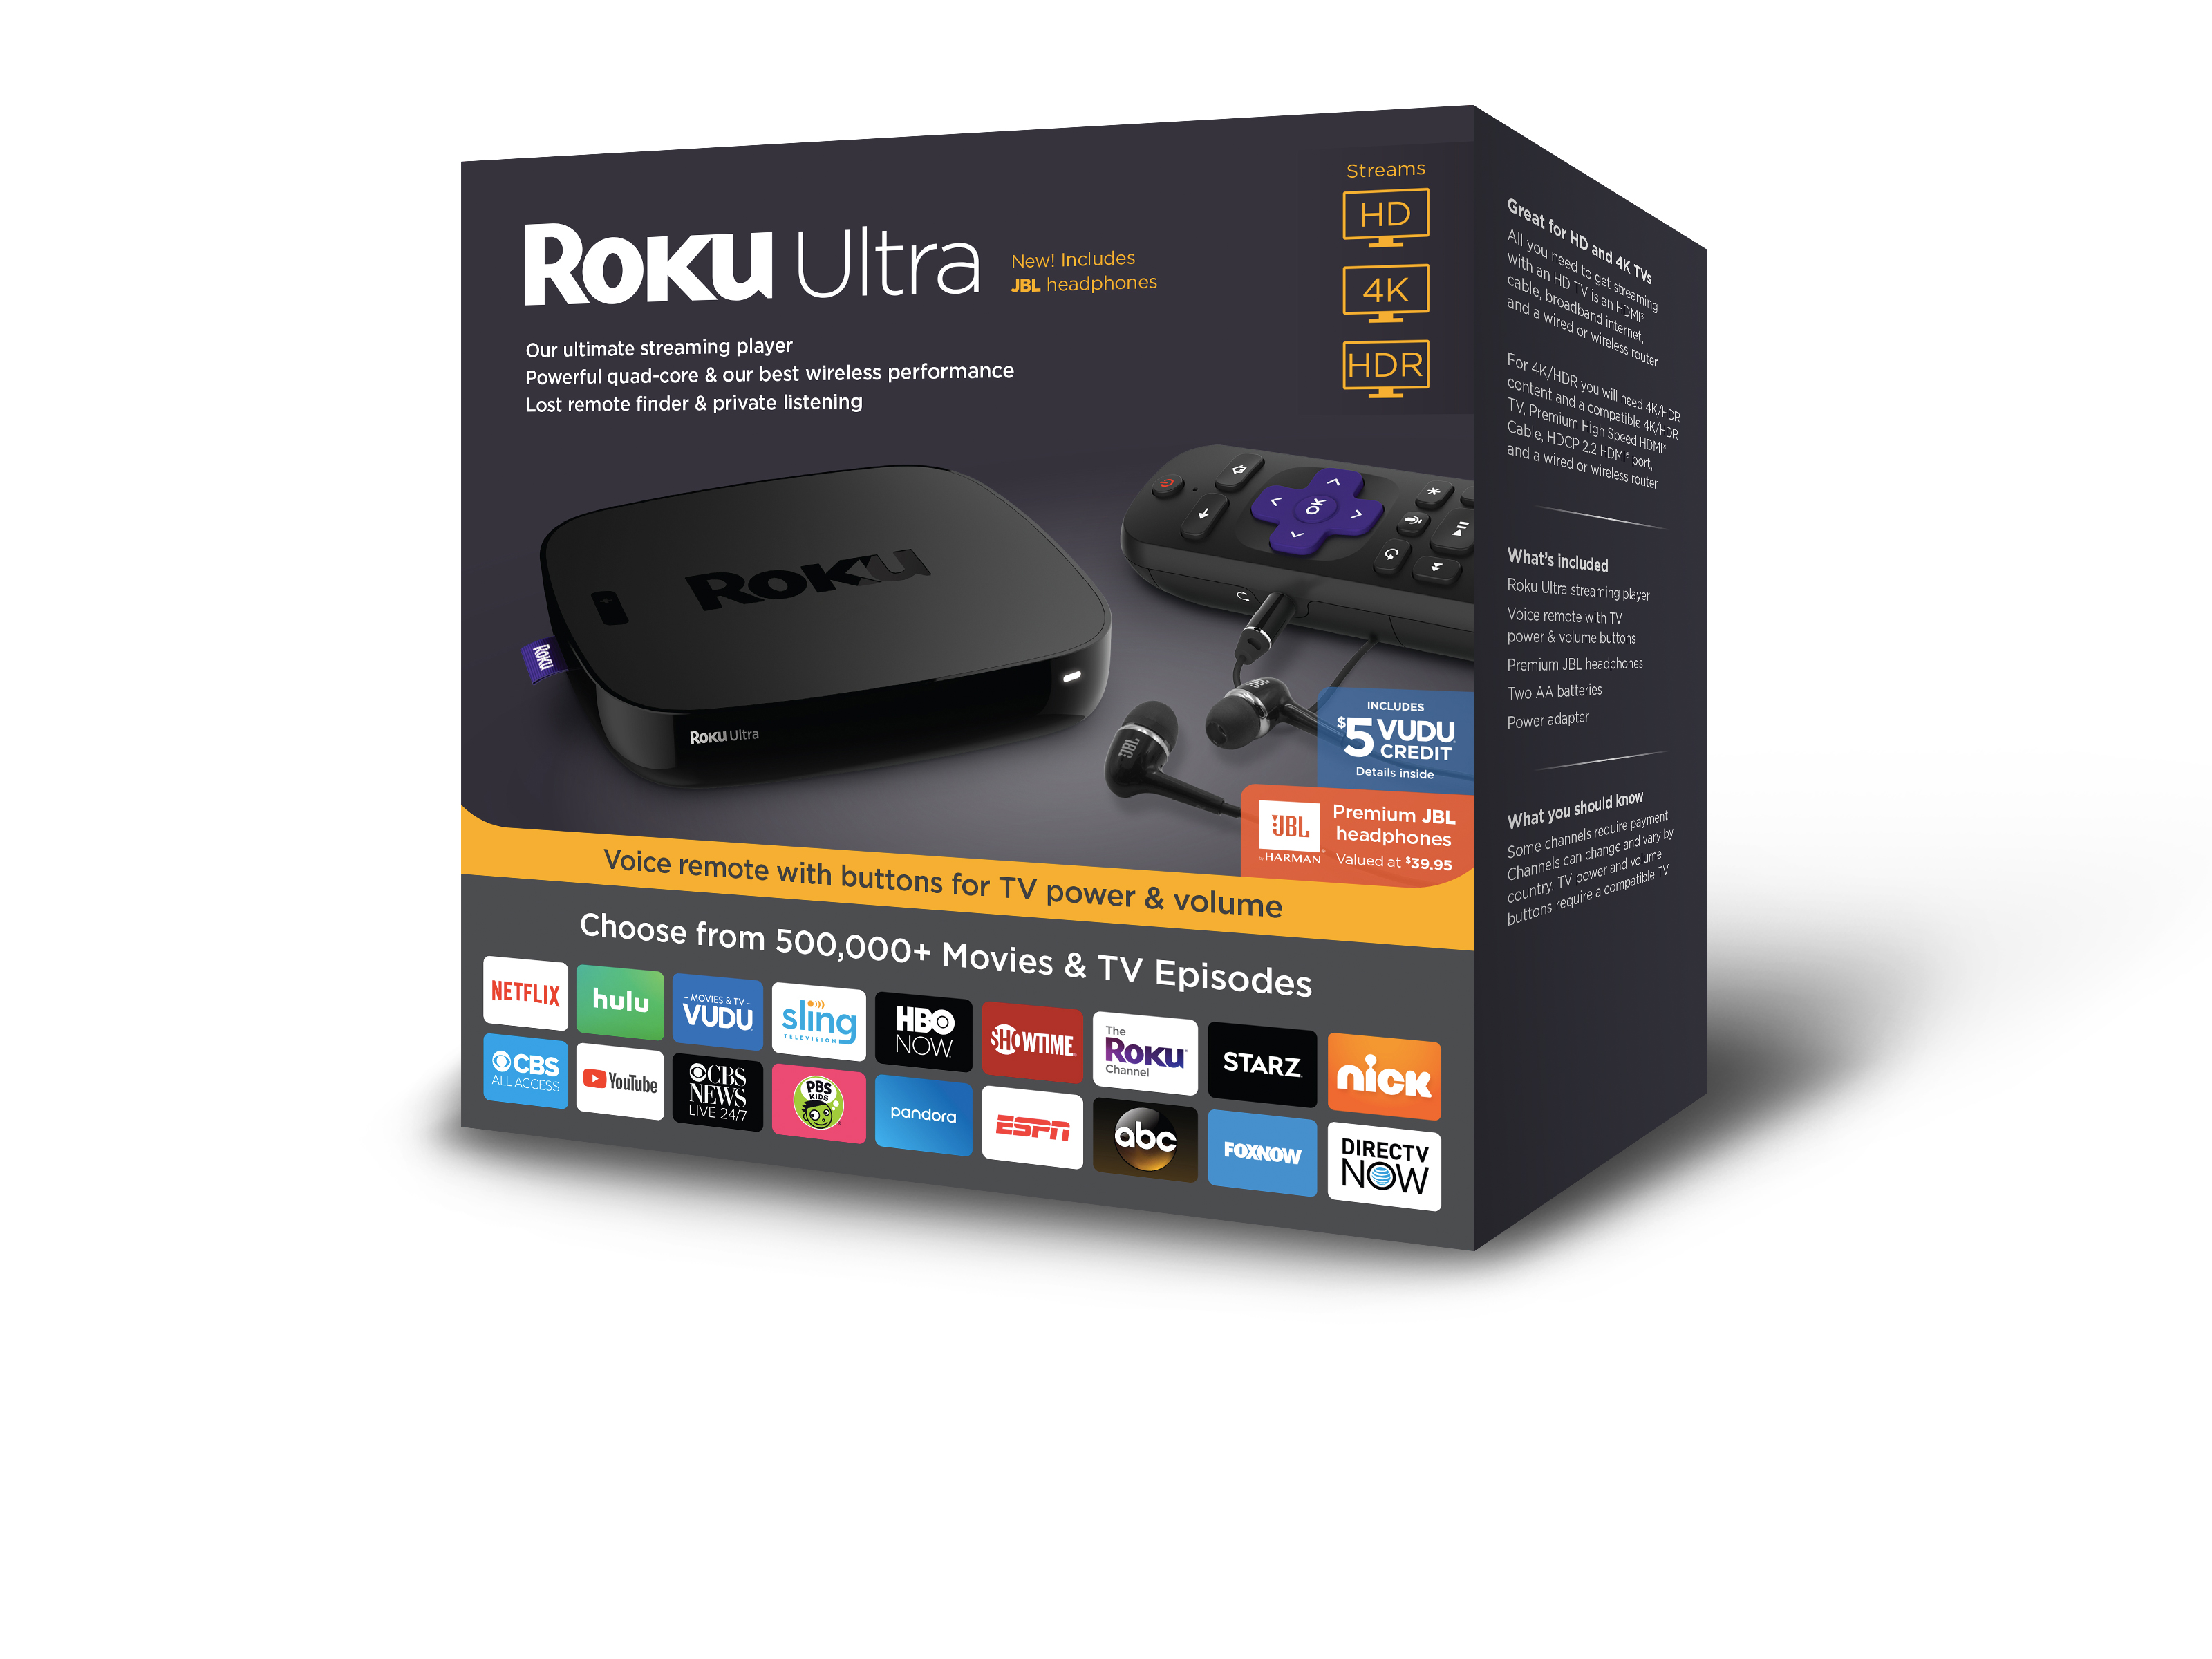 Roku Ultra 4K HDR Streaming Player (2018) with JBL headphones - image 2 of 7